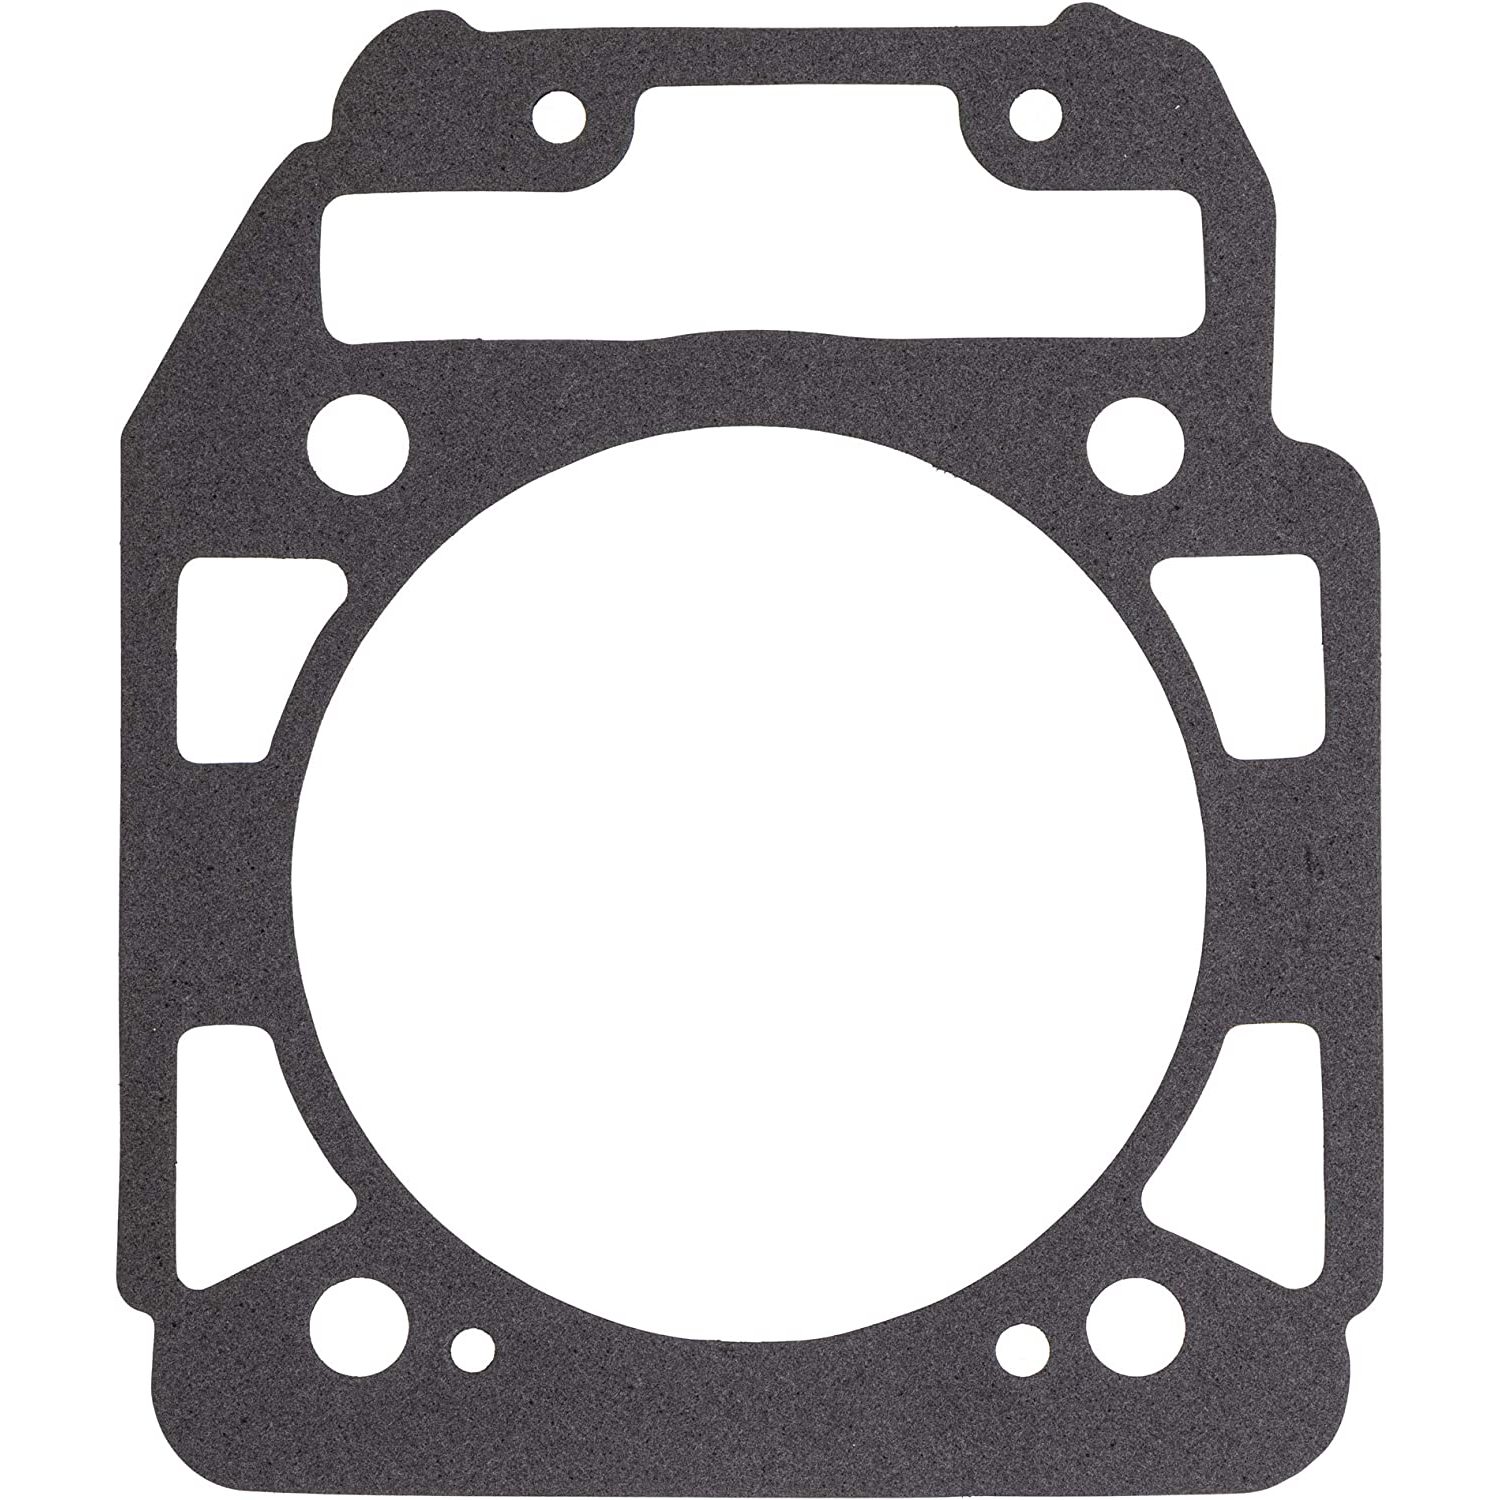 NICHE Cylinder Head and Base Gasket Kit Set Combo For 2003-2017 Ski-Doo Renegade Can-Am Commander 420630195 420630850, Base Gasket Replaces OEM Part Numbe... - image 3 of 4